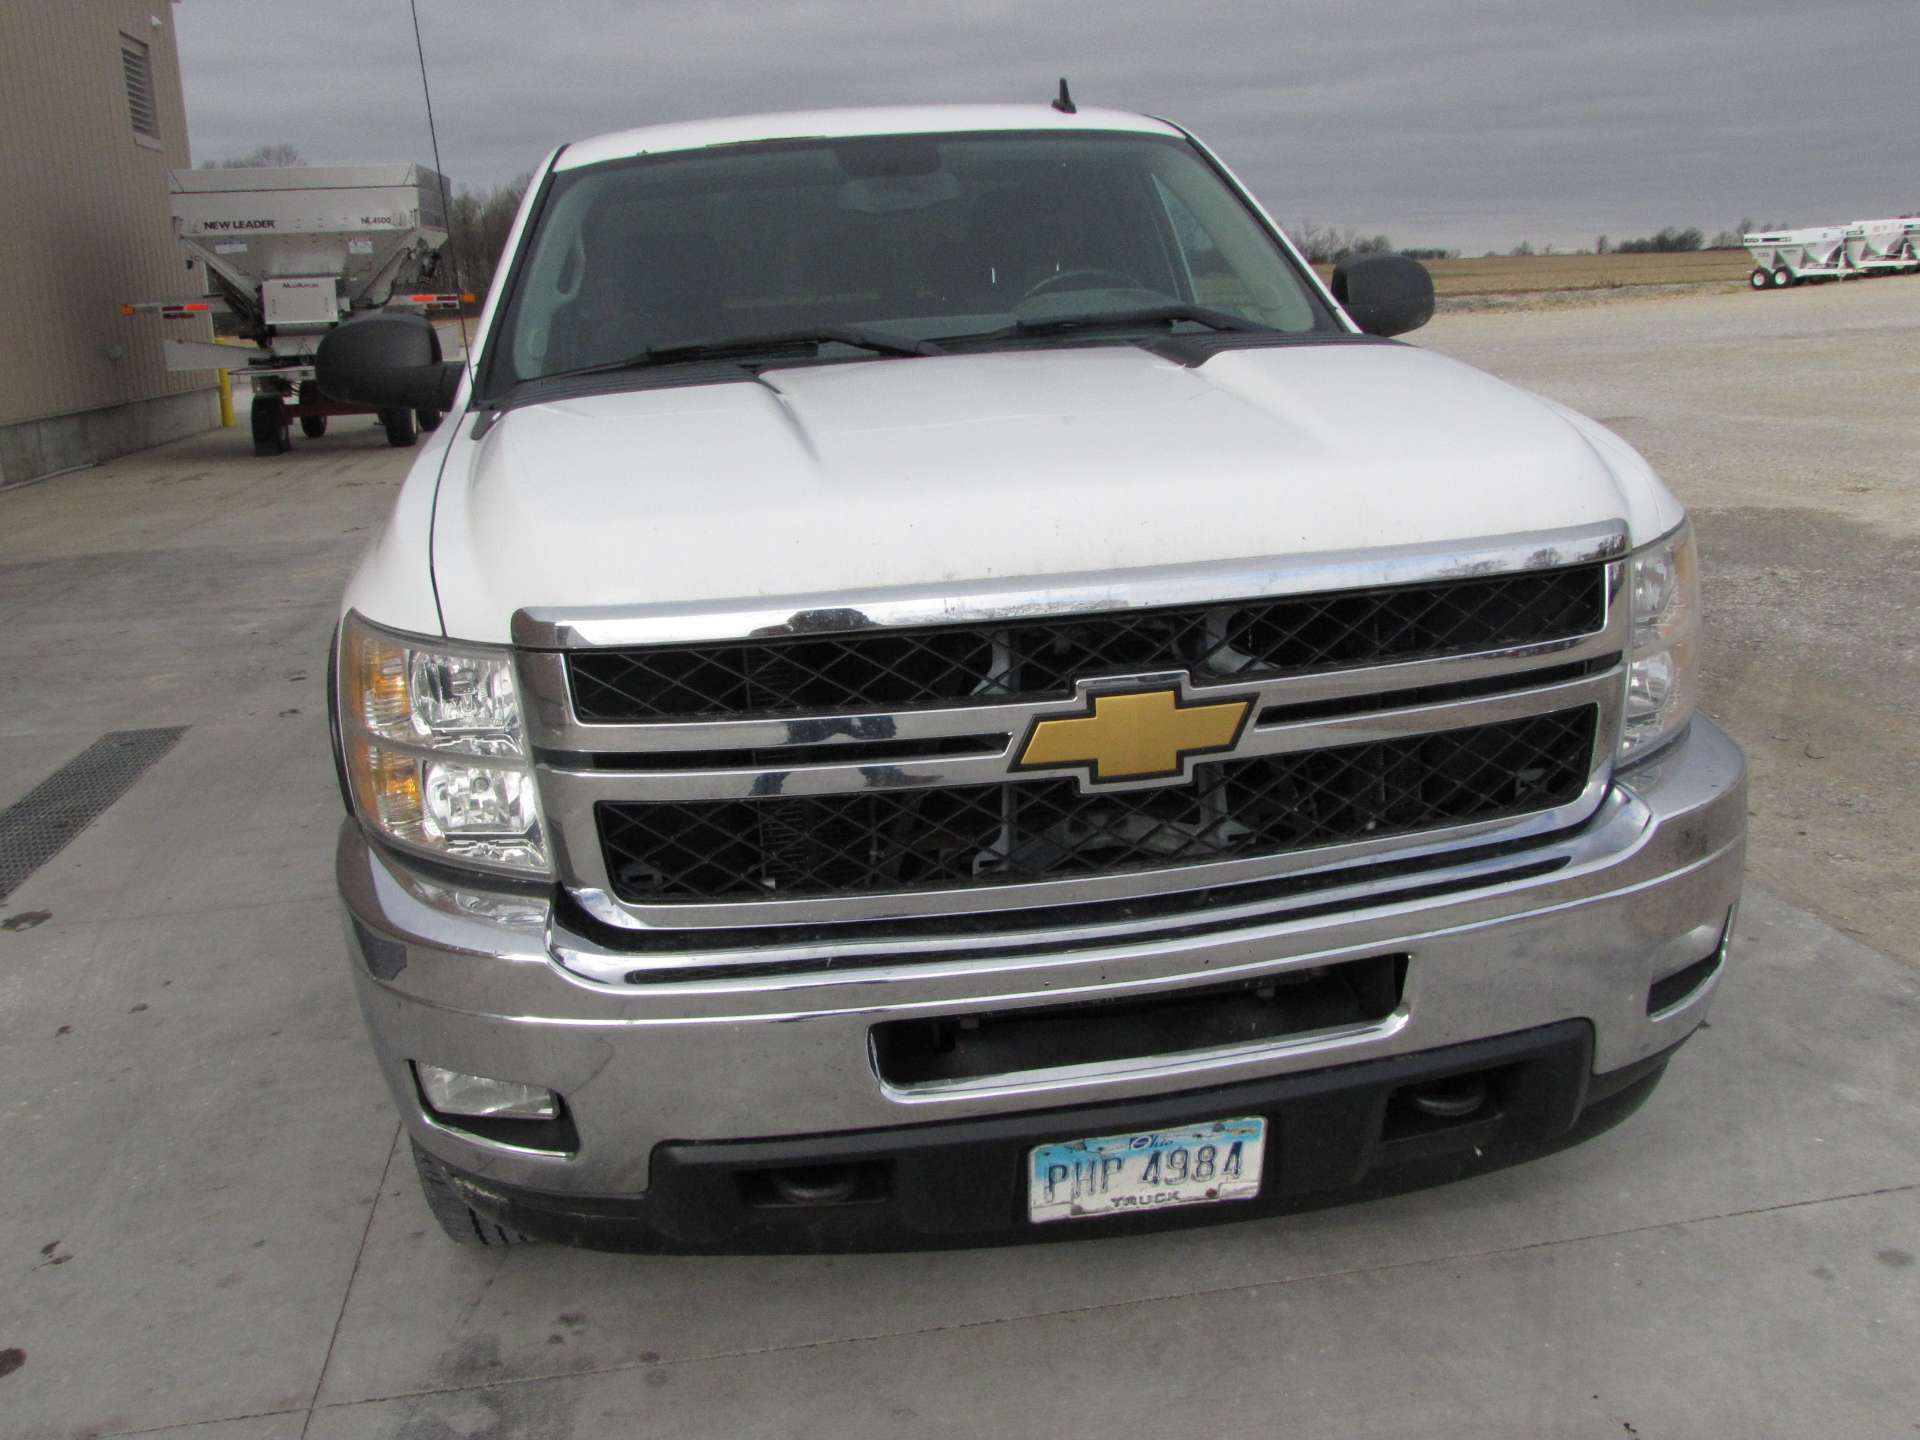 2012 Chevy 2500 HD pickup truck - Image 15 of 57